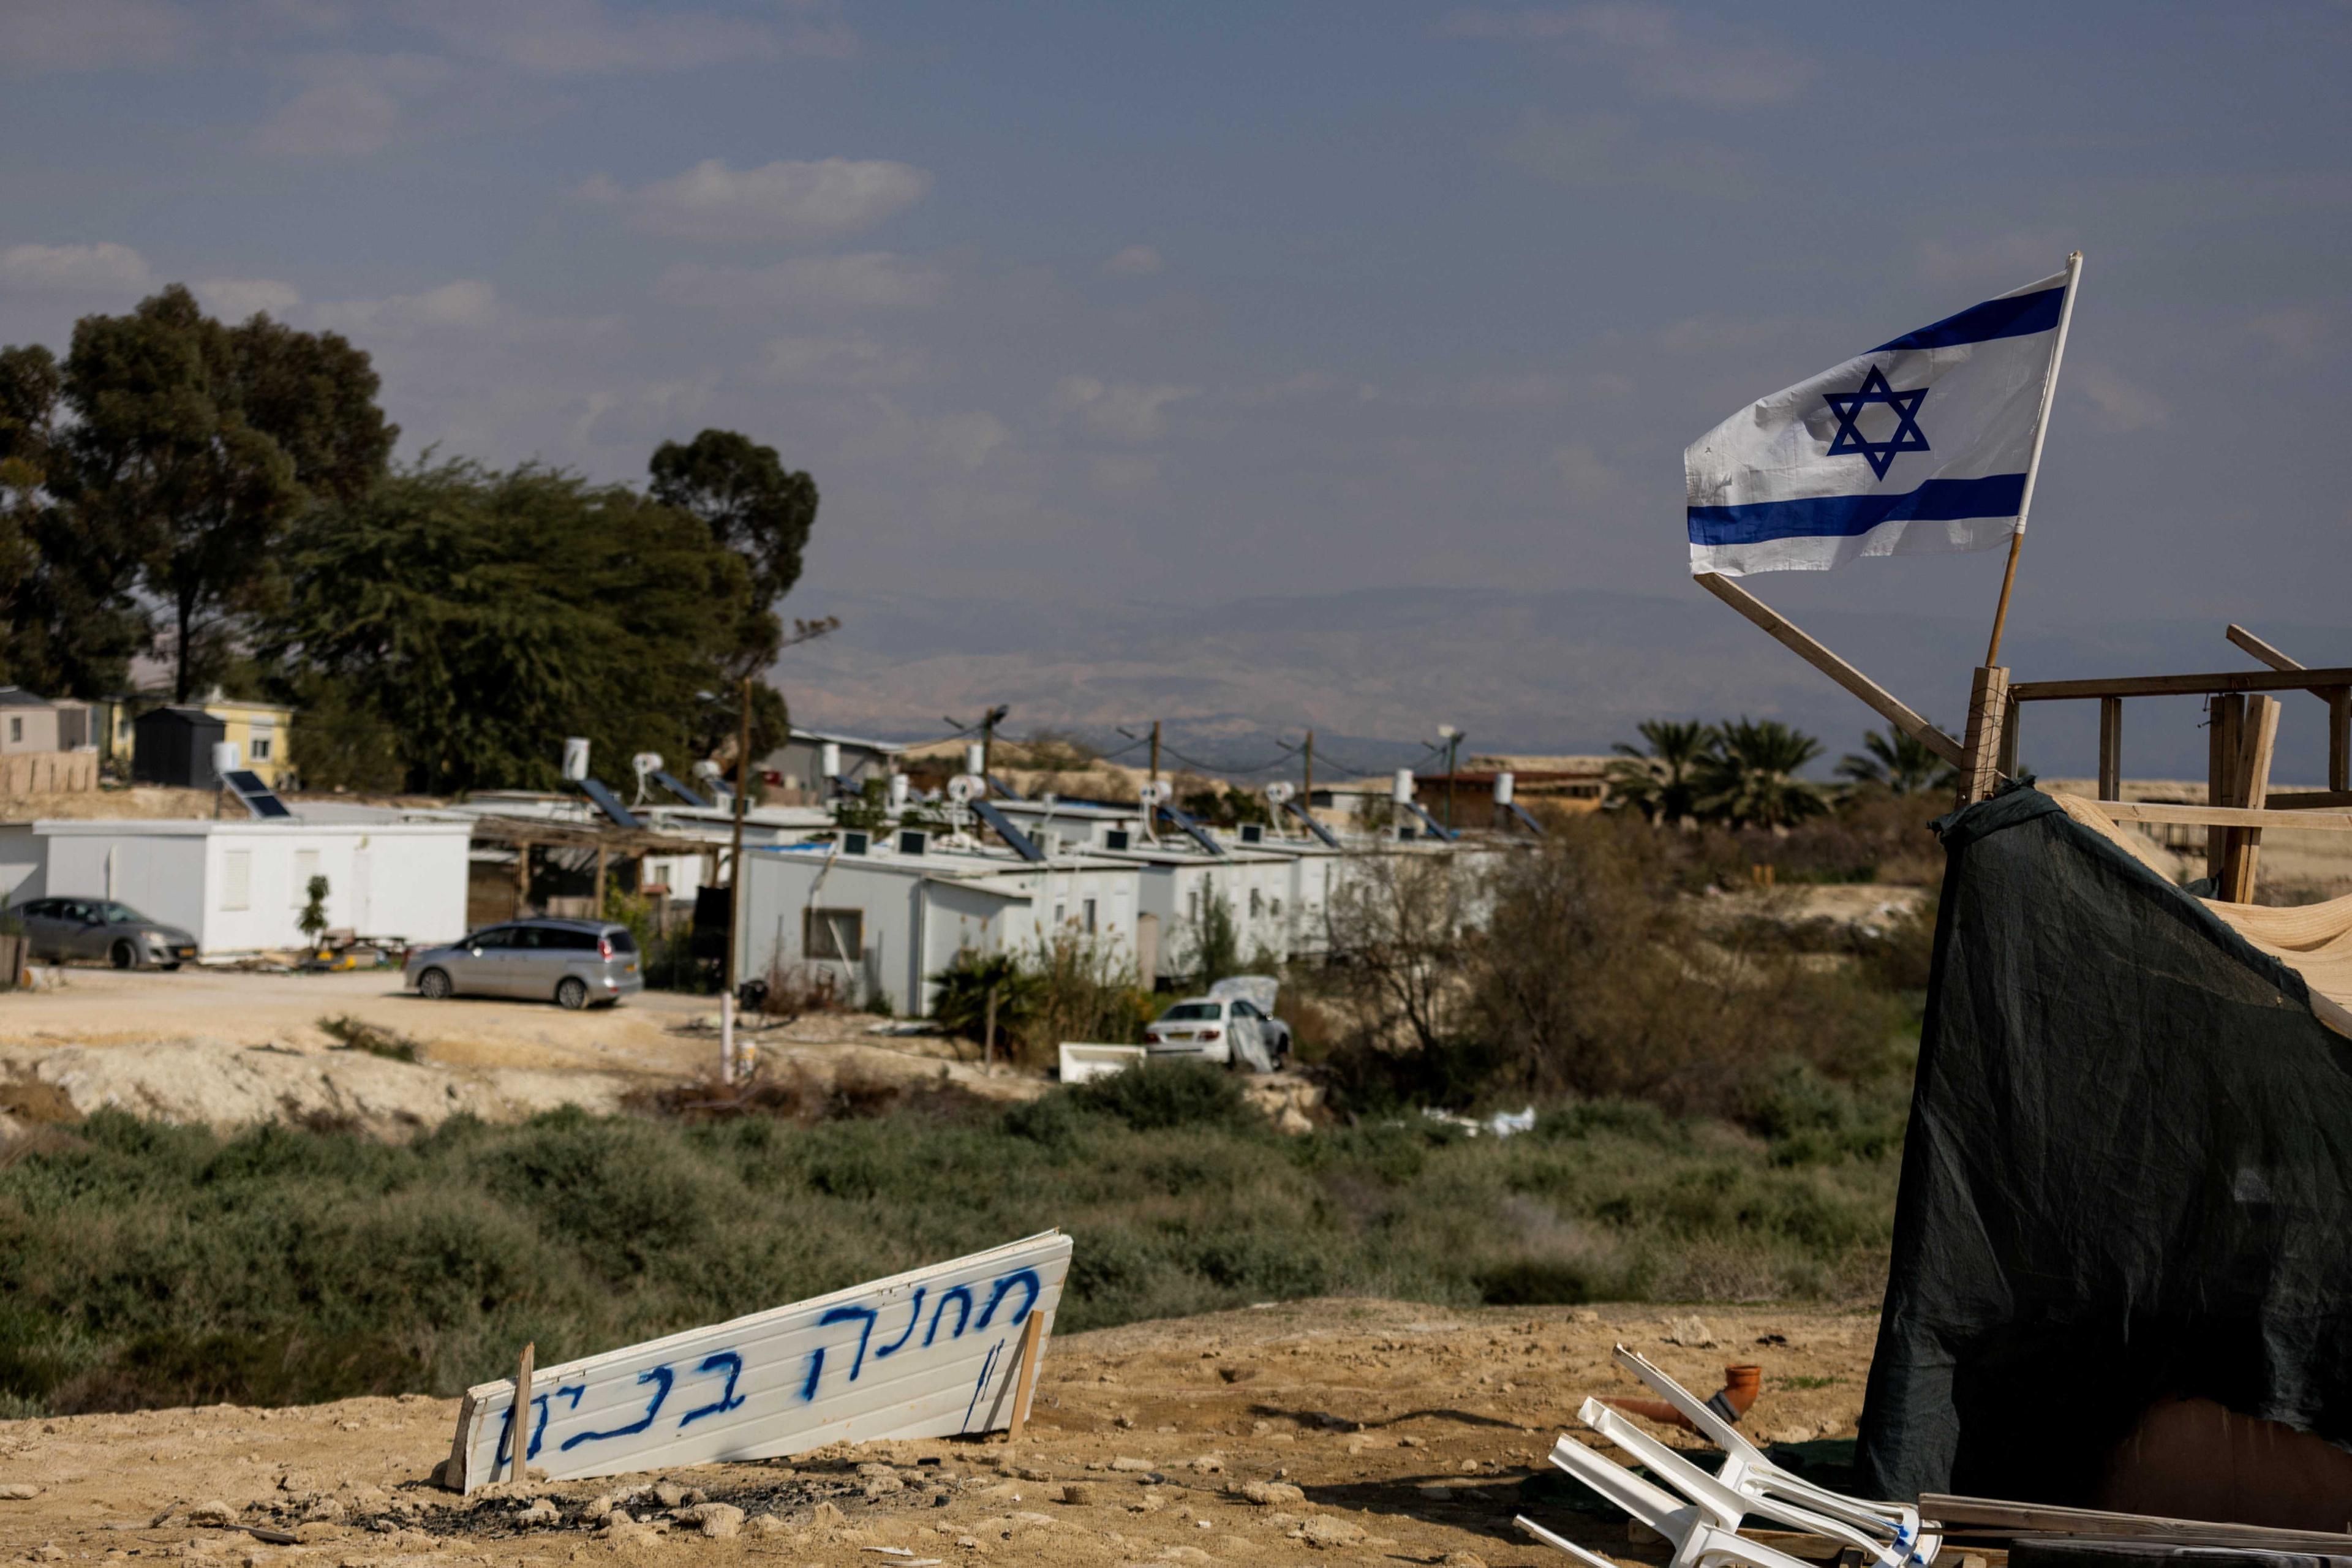 Mobile homes are seen in Beit Hogla, a settlement in the Israeli-occupied West Bank, Feb 15. Photo: Reuters